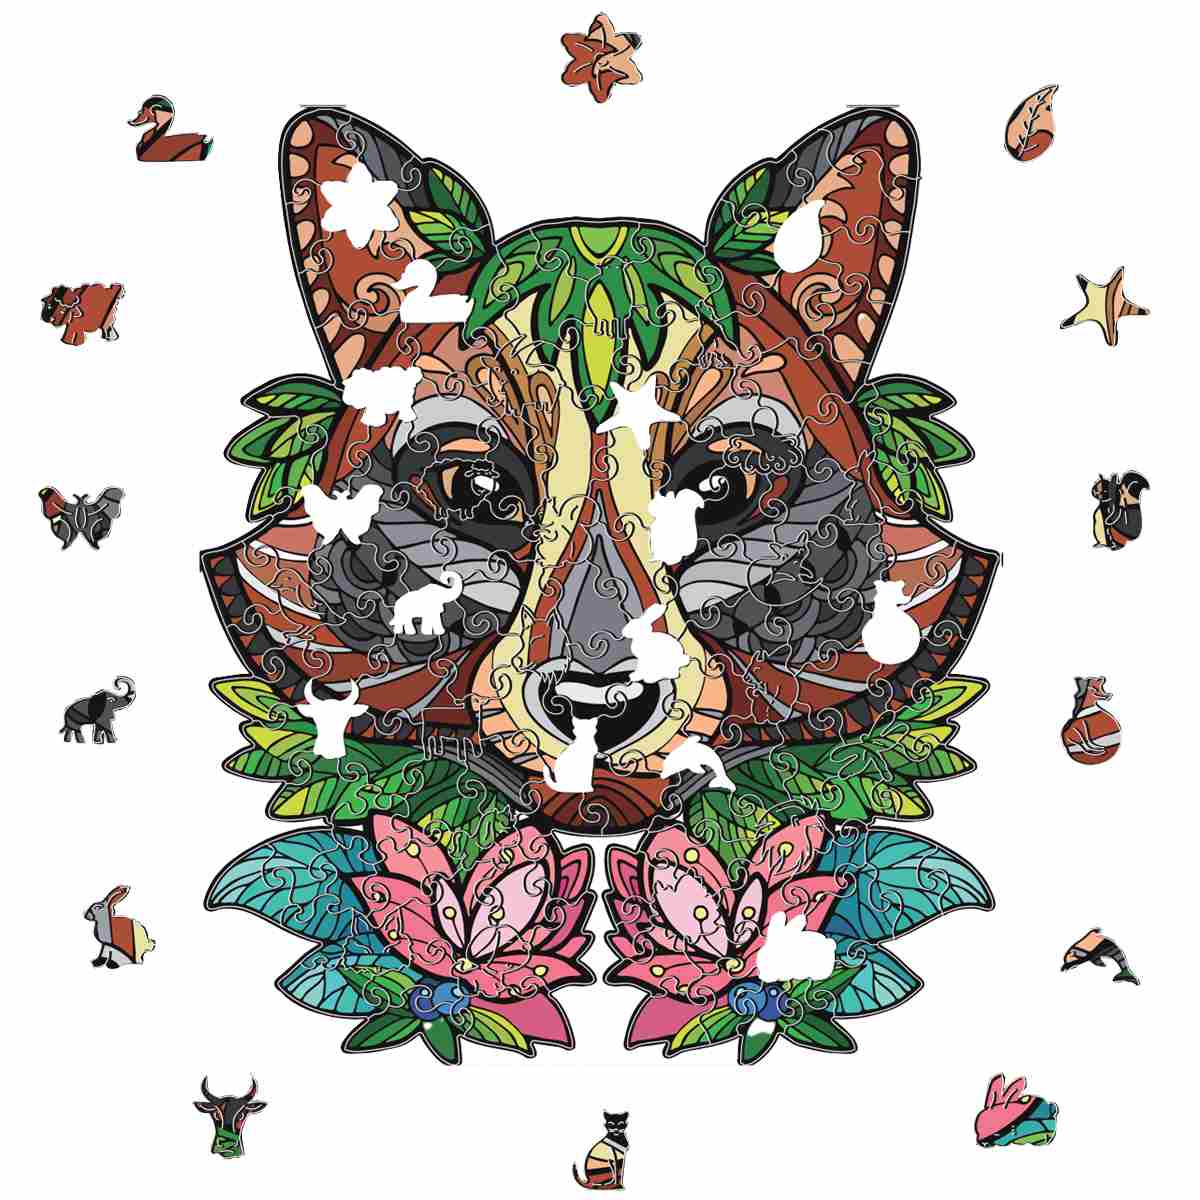 Blooming Raccoon - Wooden Jigsaw Puzzle